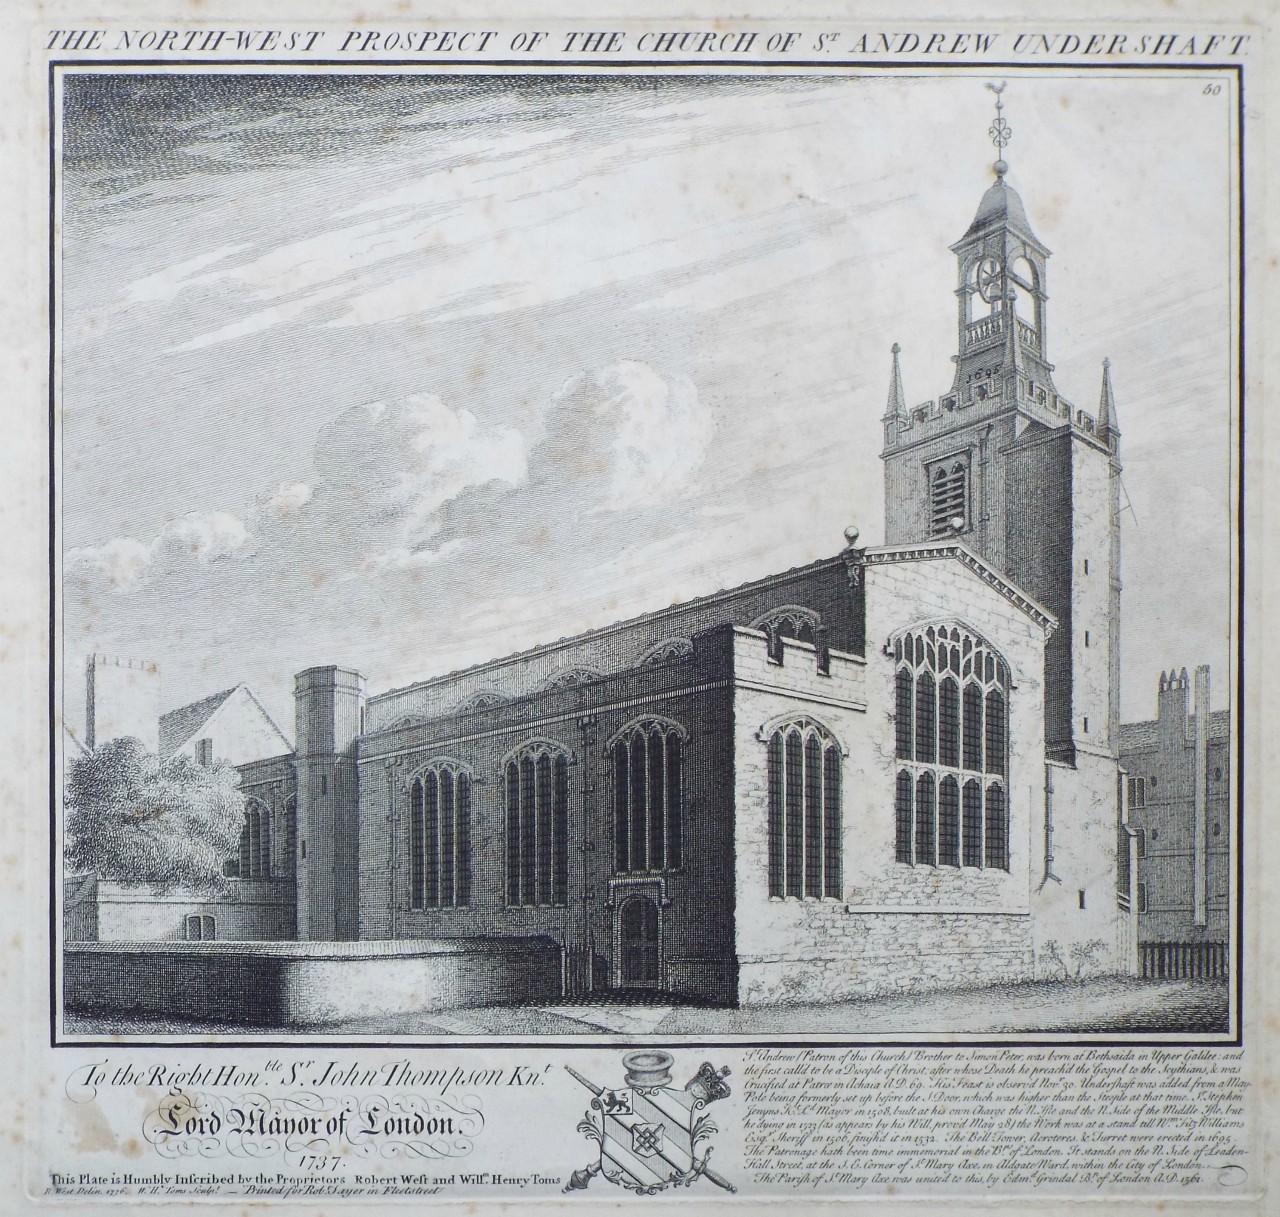 Print - The North-West Prospect of the Church of St. Andrew Undershaft. To the Right Honble. Sr. John Thompson Knt. Lord Mayor of London. 1737. - Toms